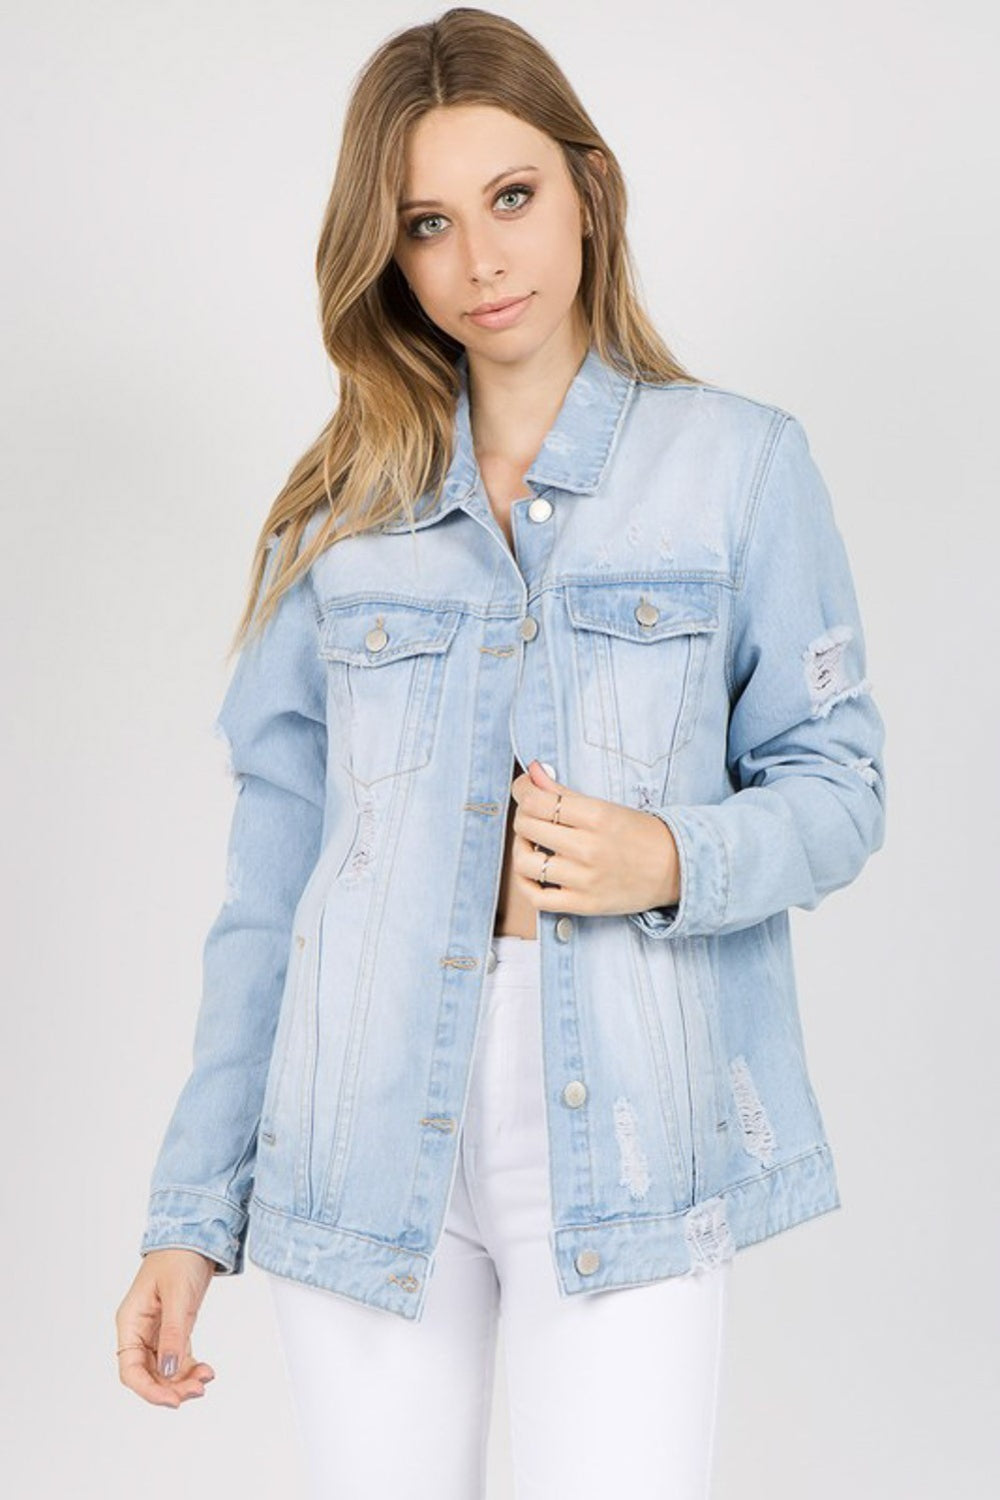 American Bazi Letter Patched Distressed Denim Jacket - Tigbuls Variety Fashion